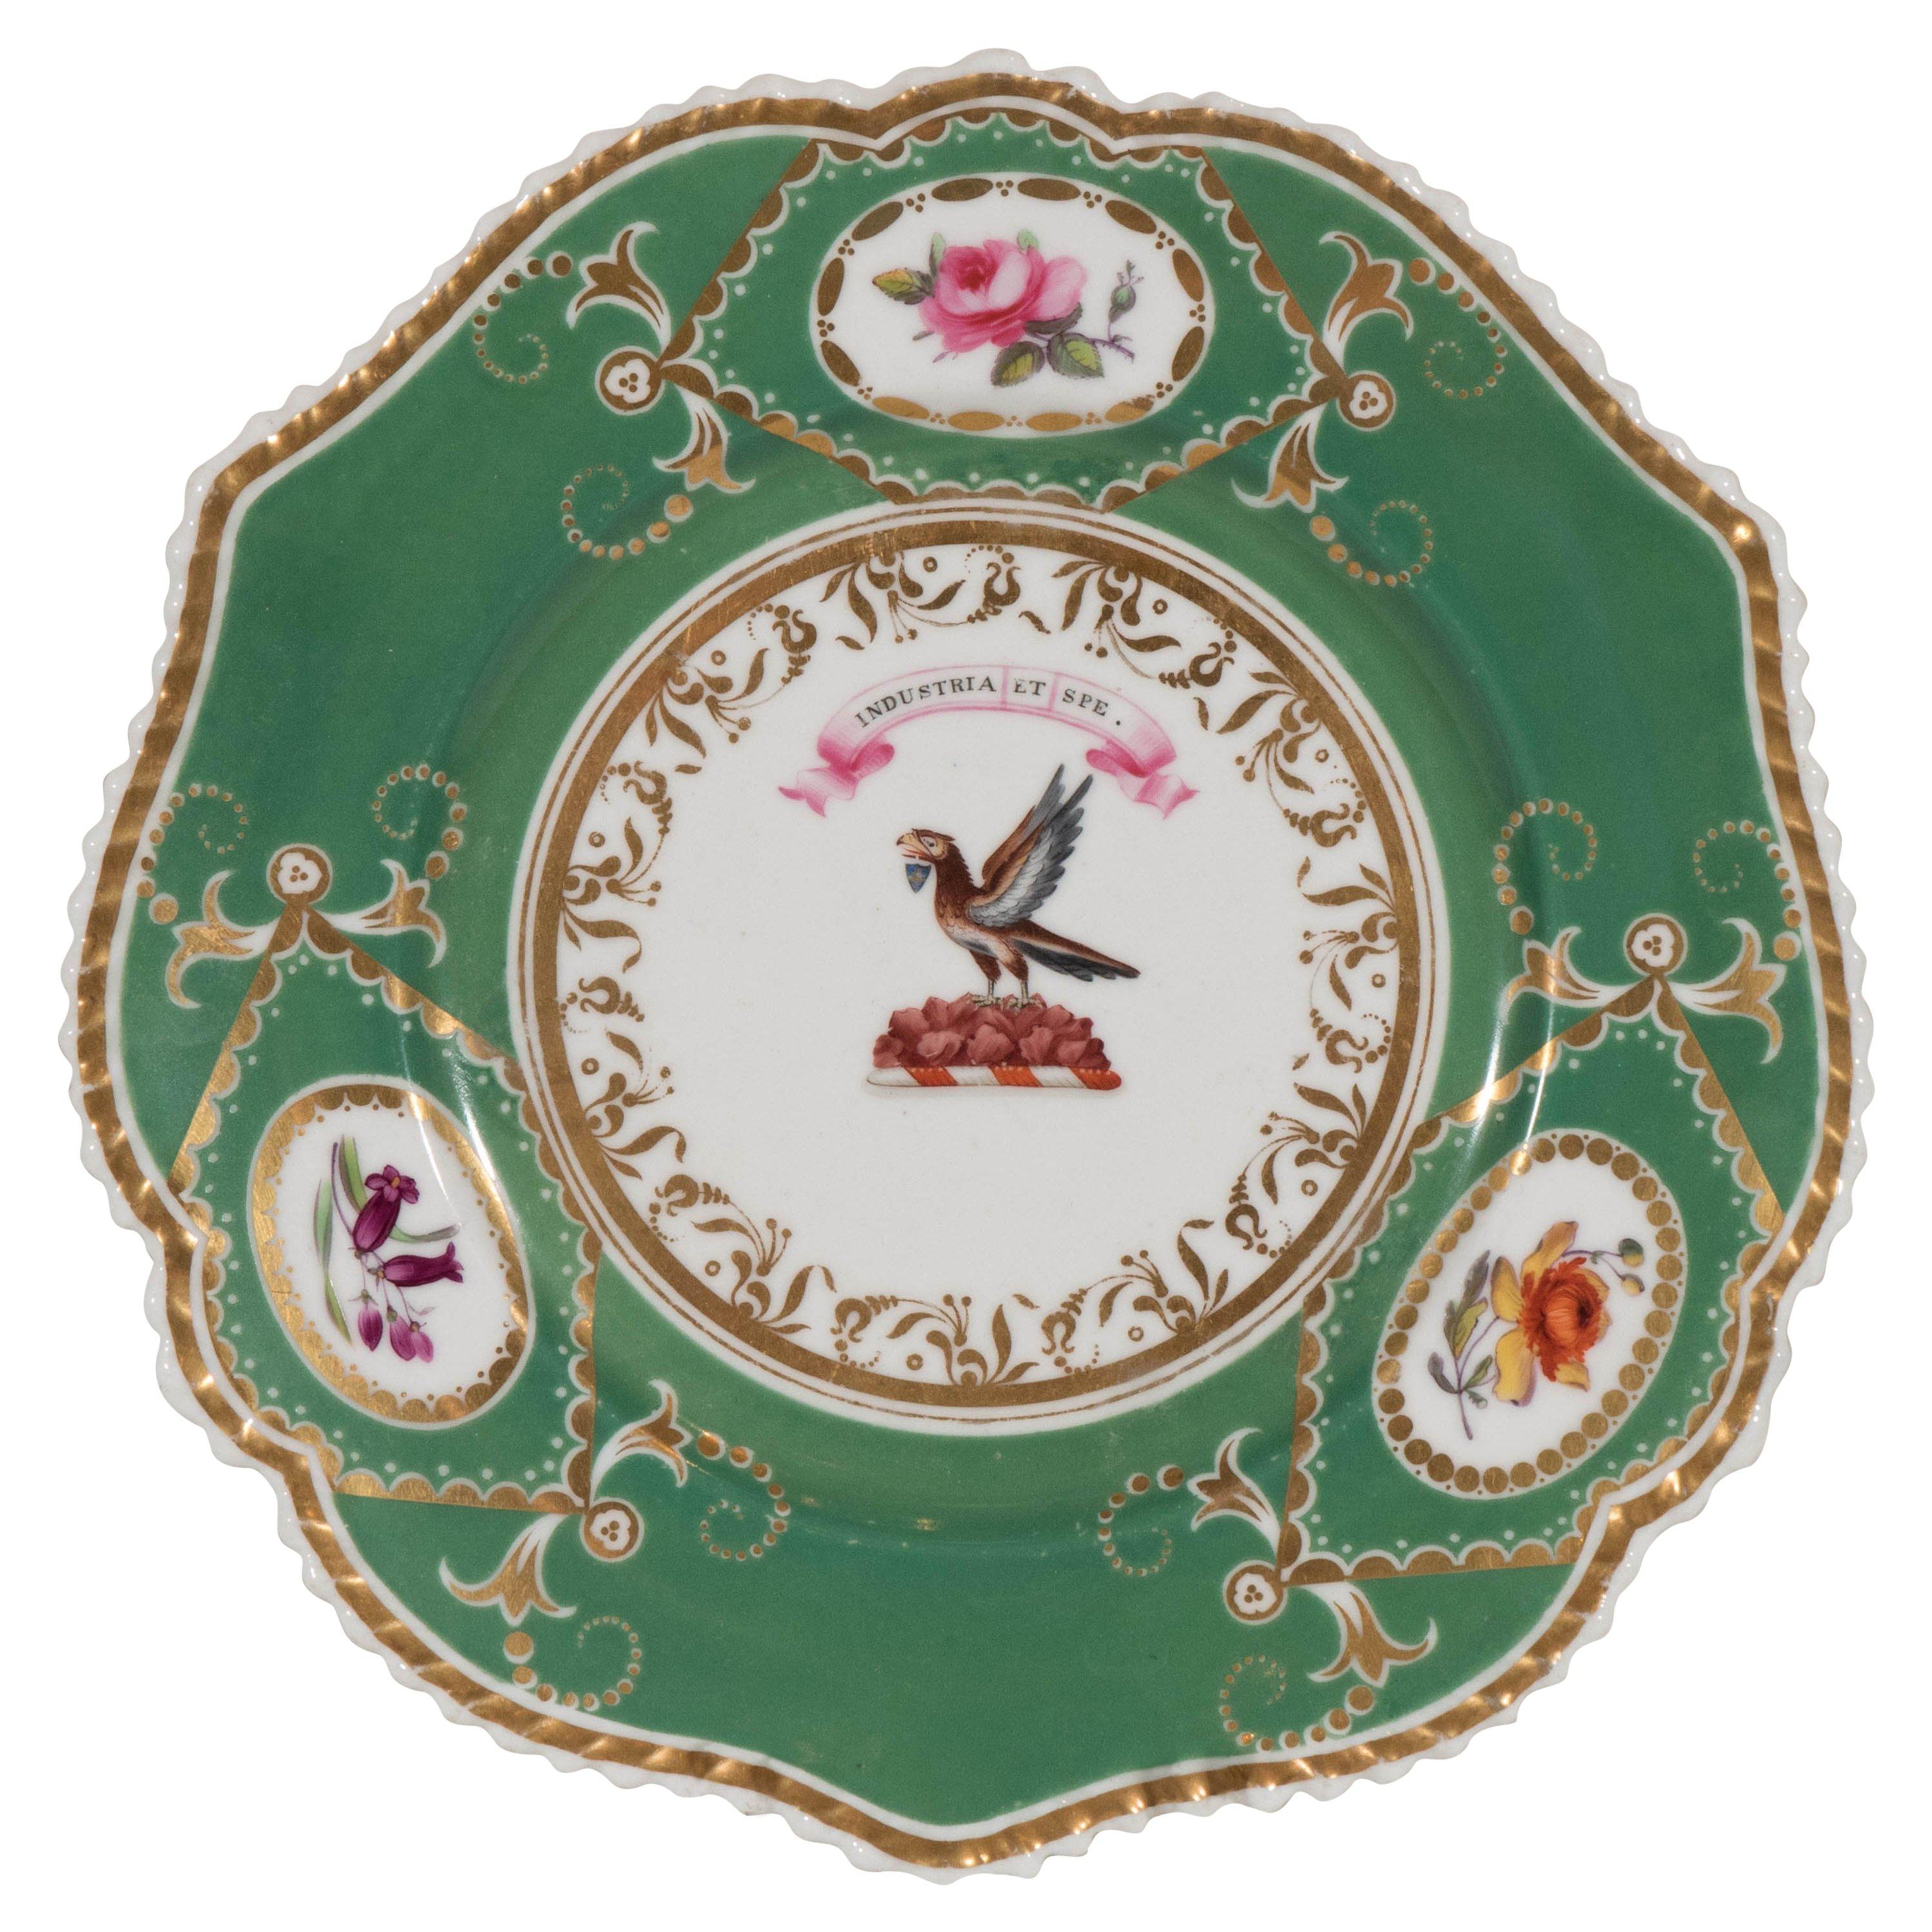  English Porcelain Armorial Plate Hand Painted Eagle Motto By Industry and Hope